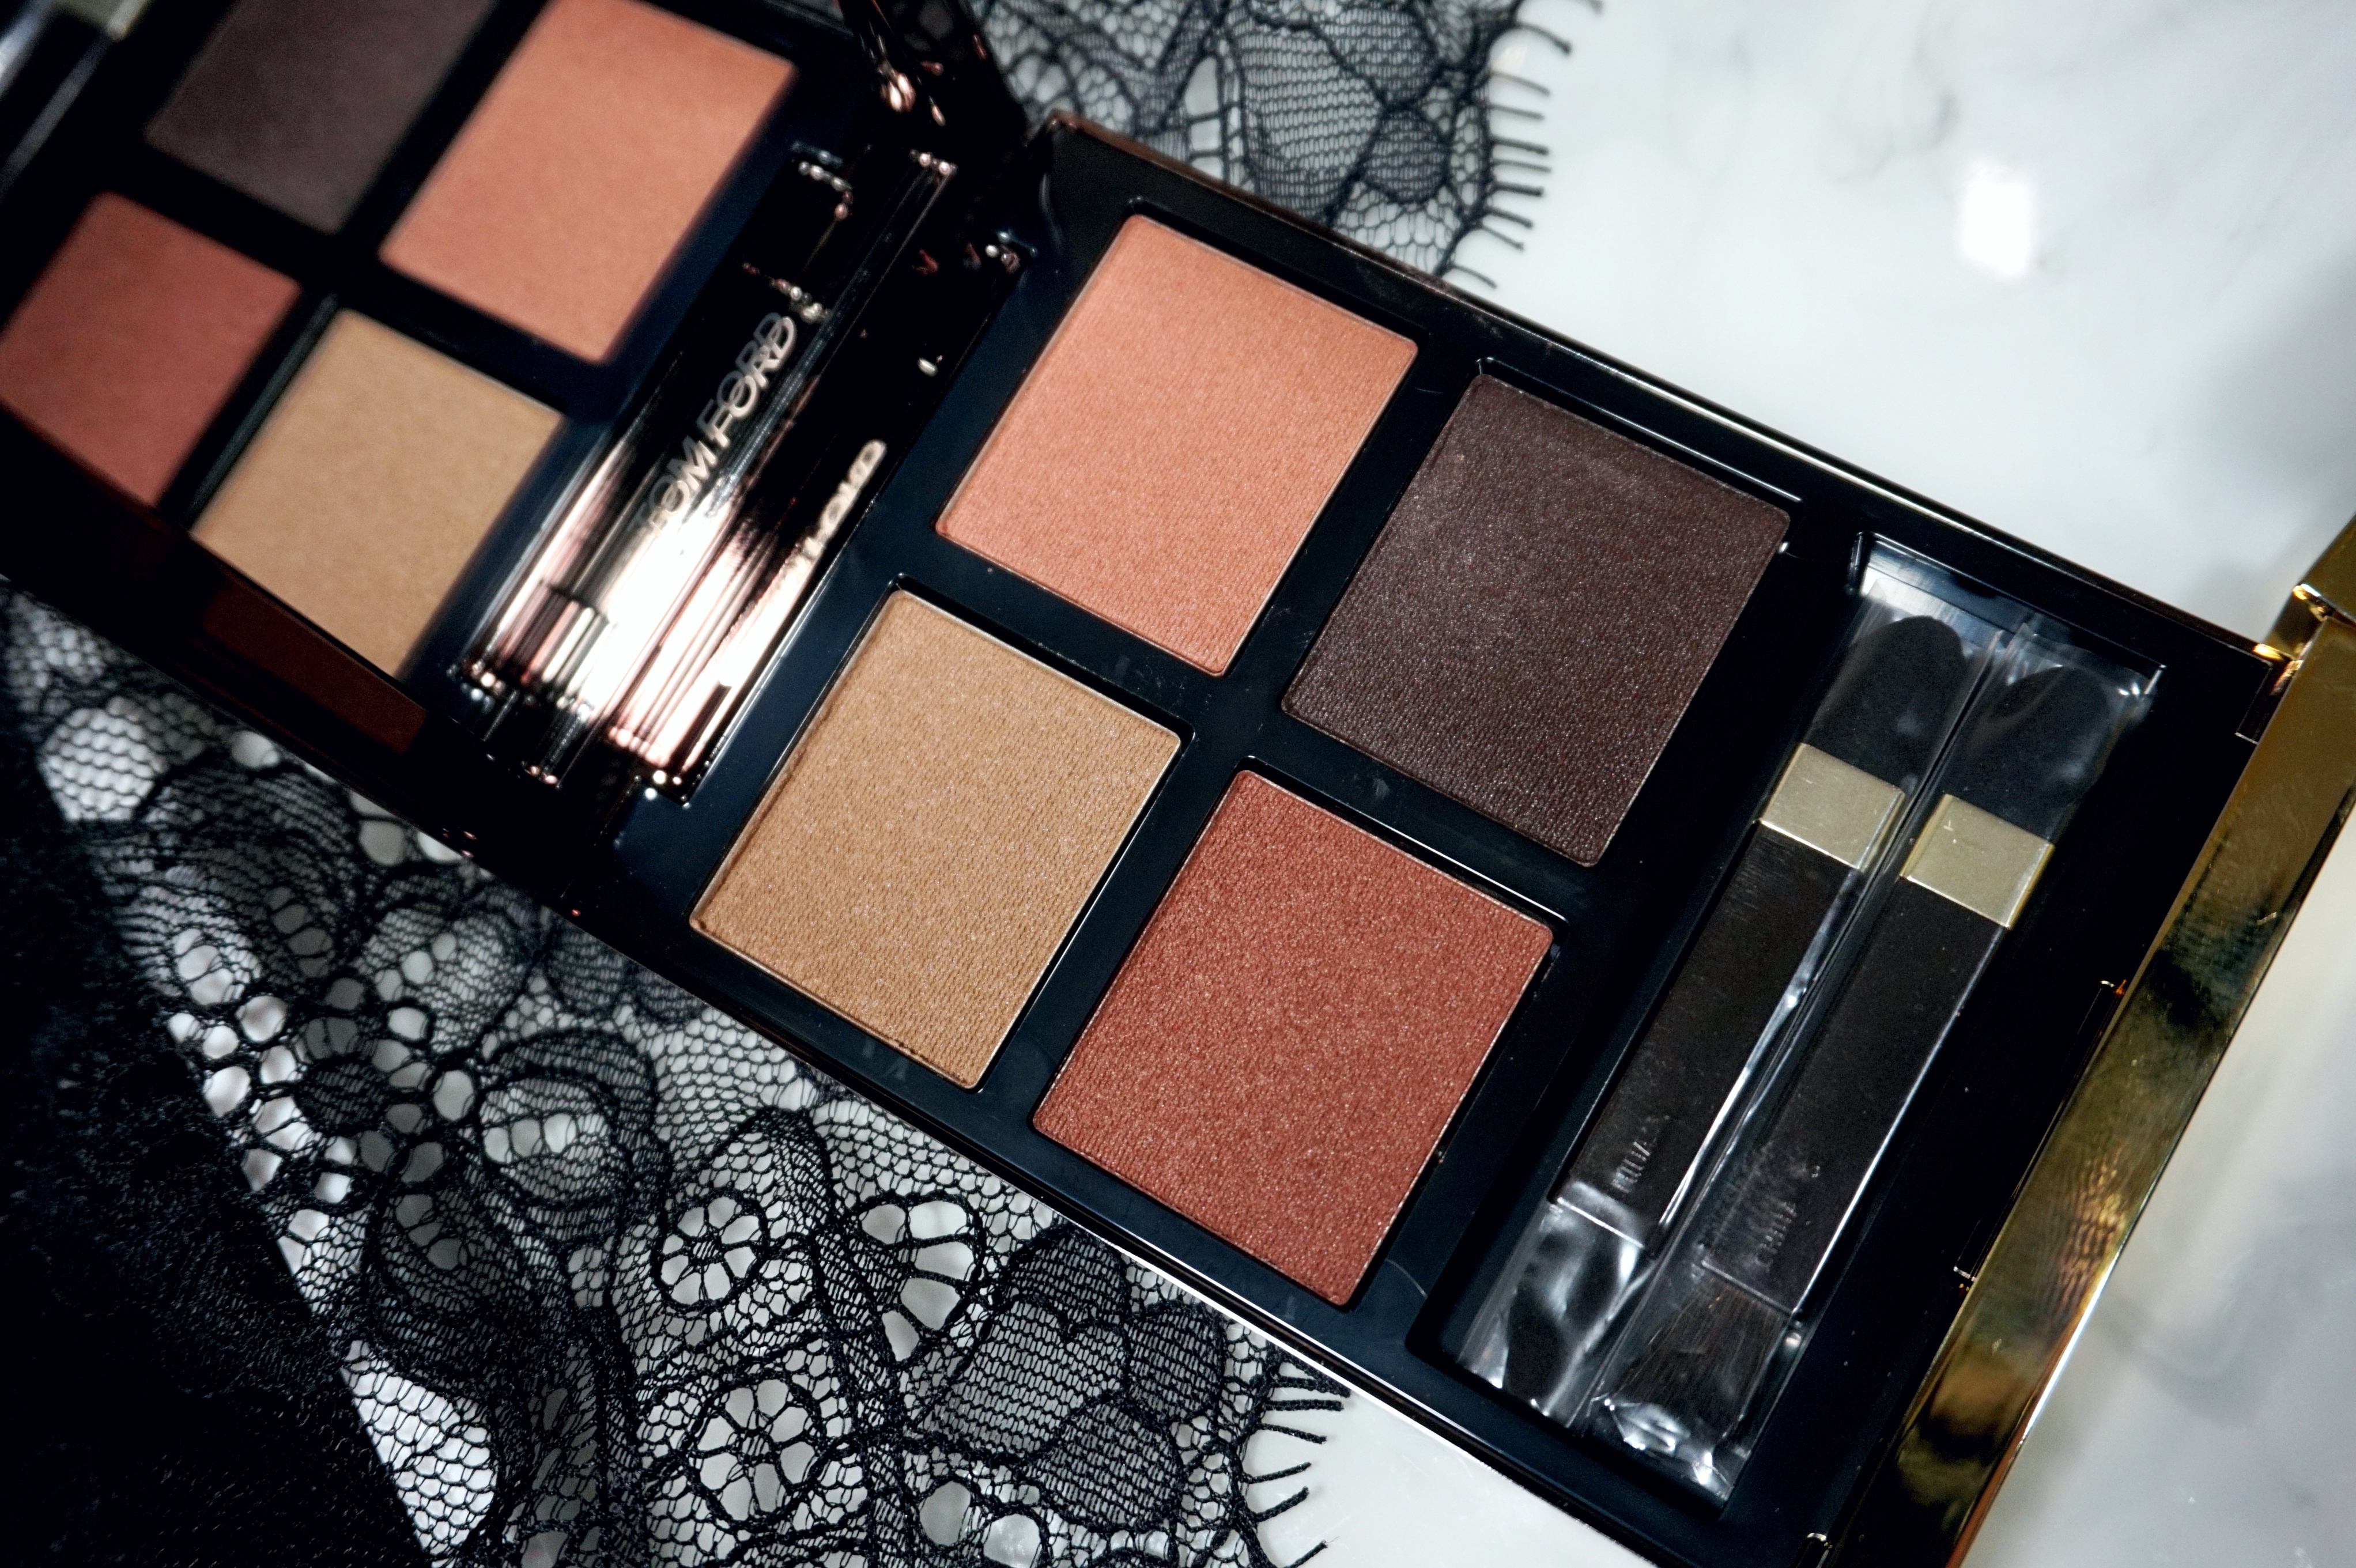 Tom Ford Eye Color Crème Eyeshadow Quad Review and Swatches